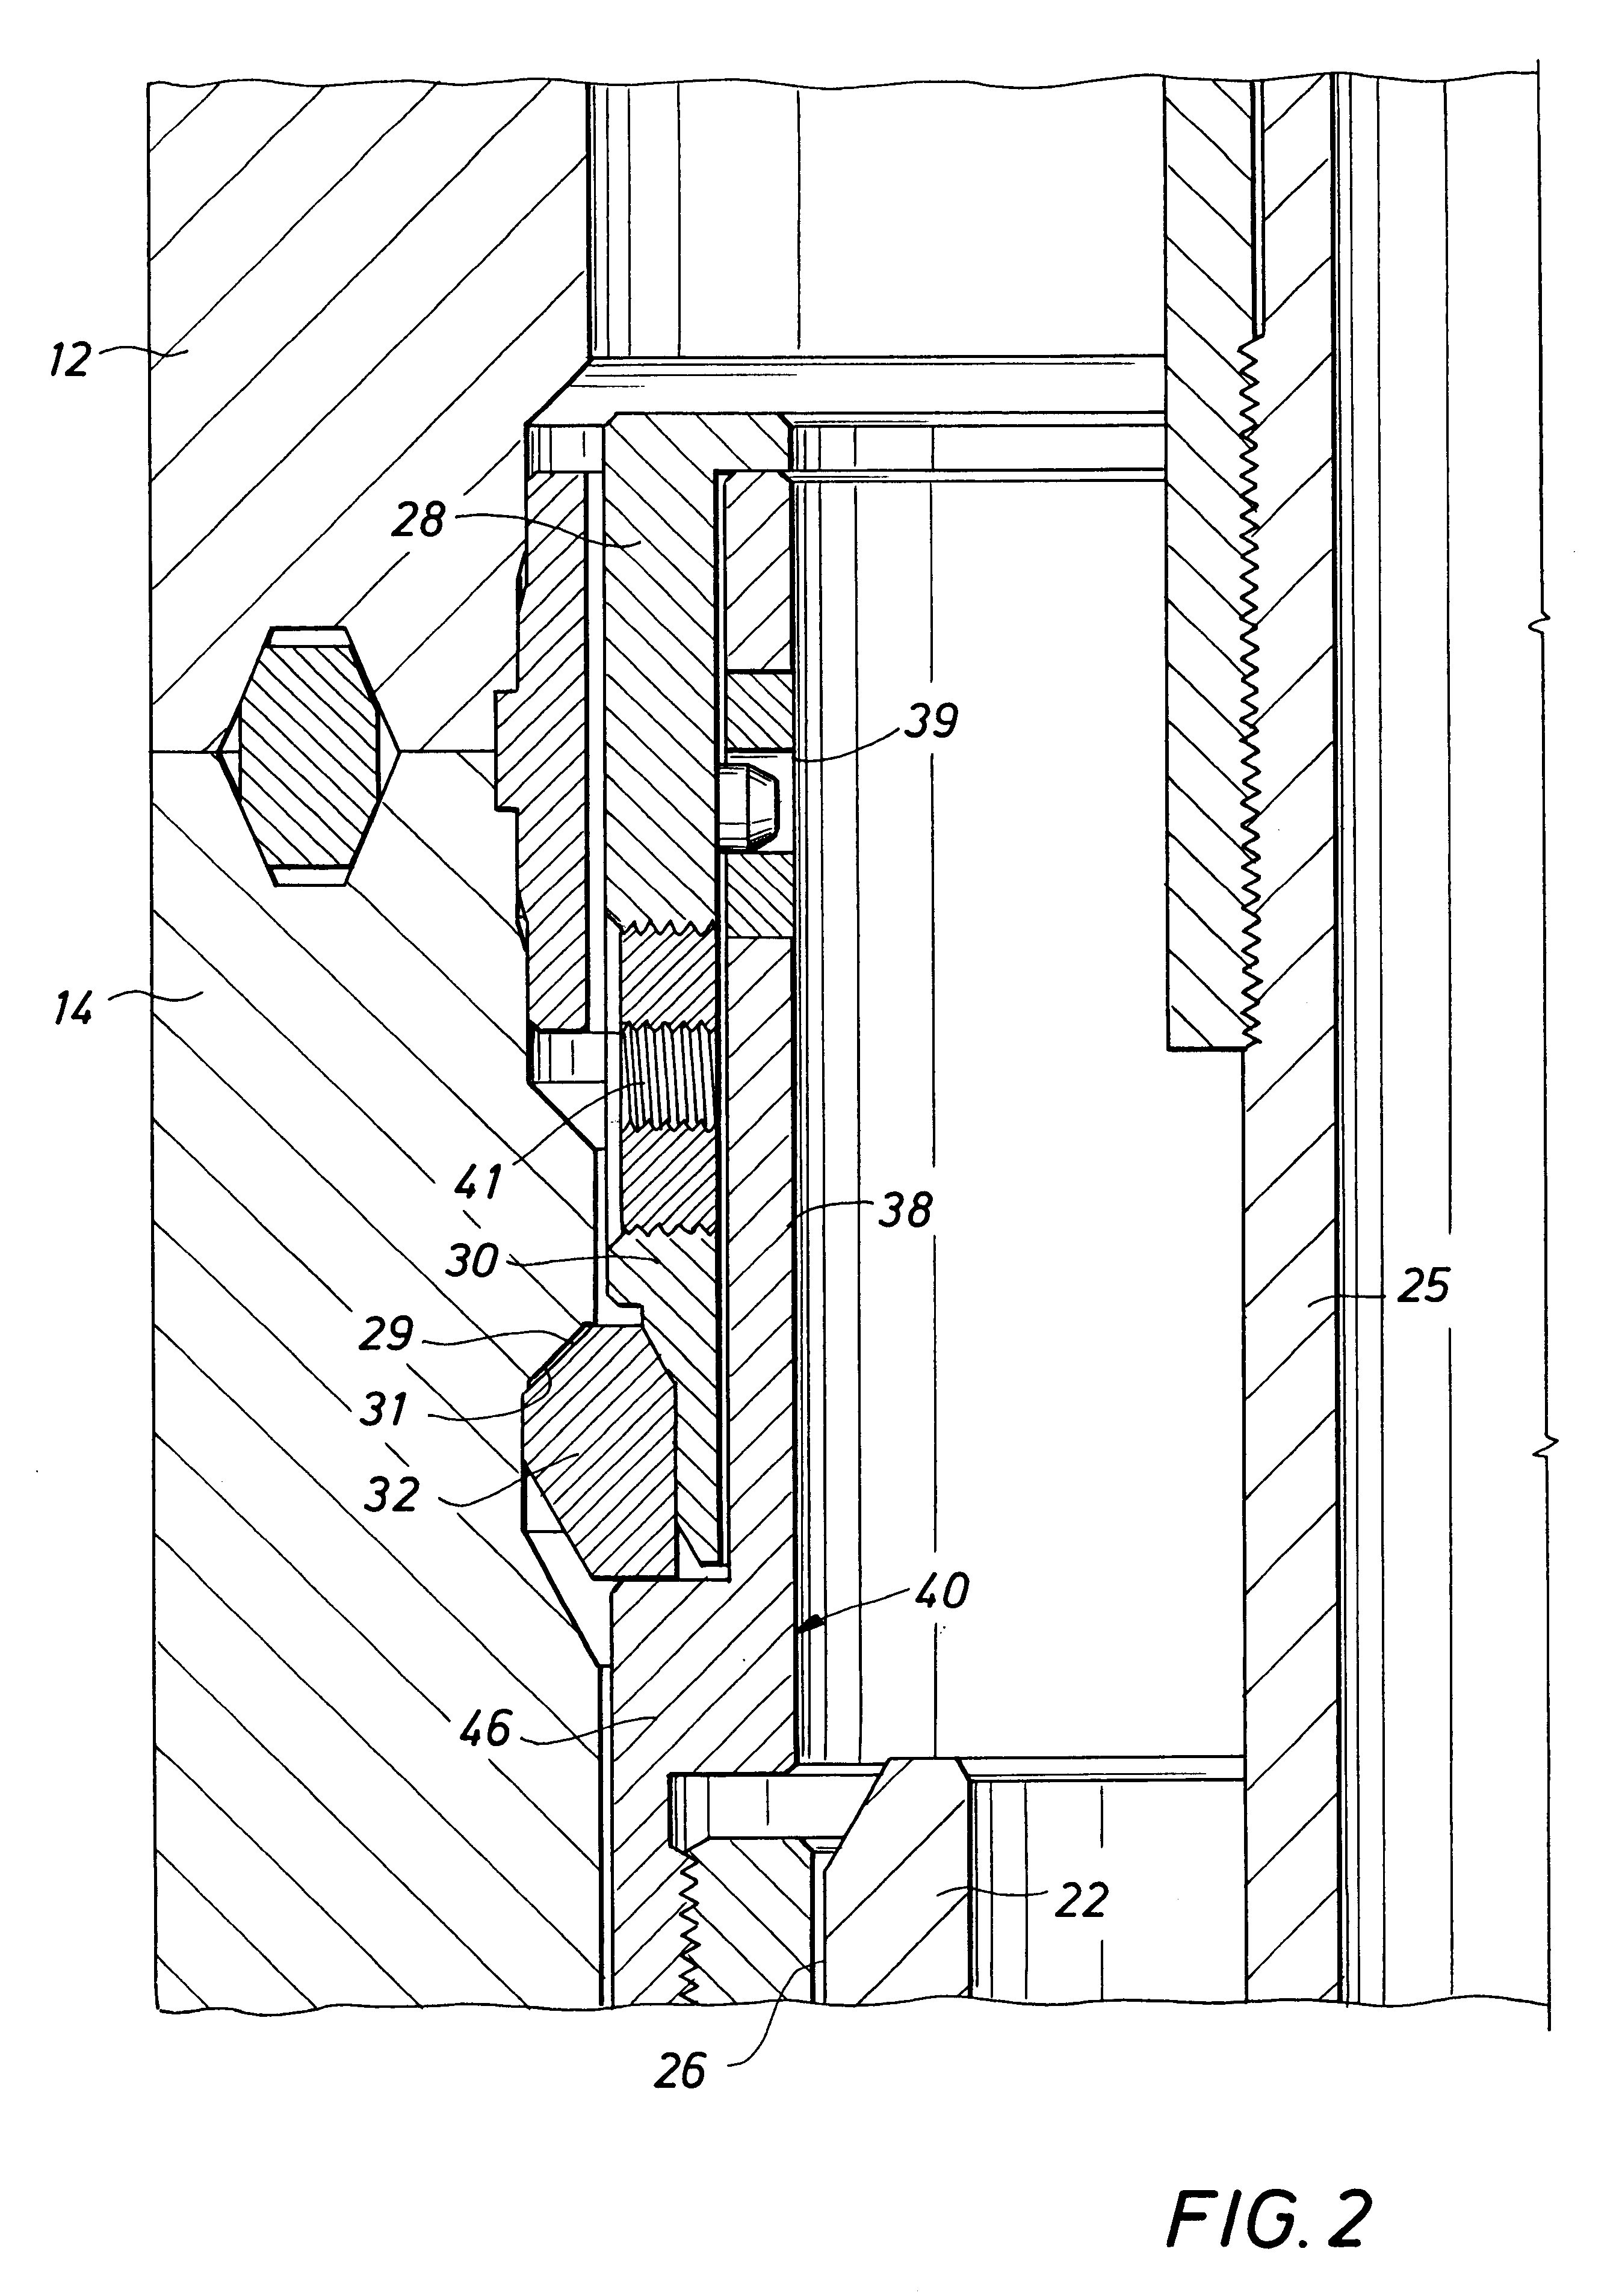 Energized sealing cartridge for annulus sealing between tubular well components